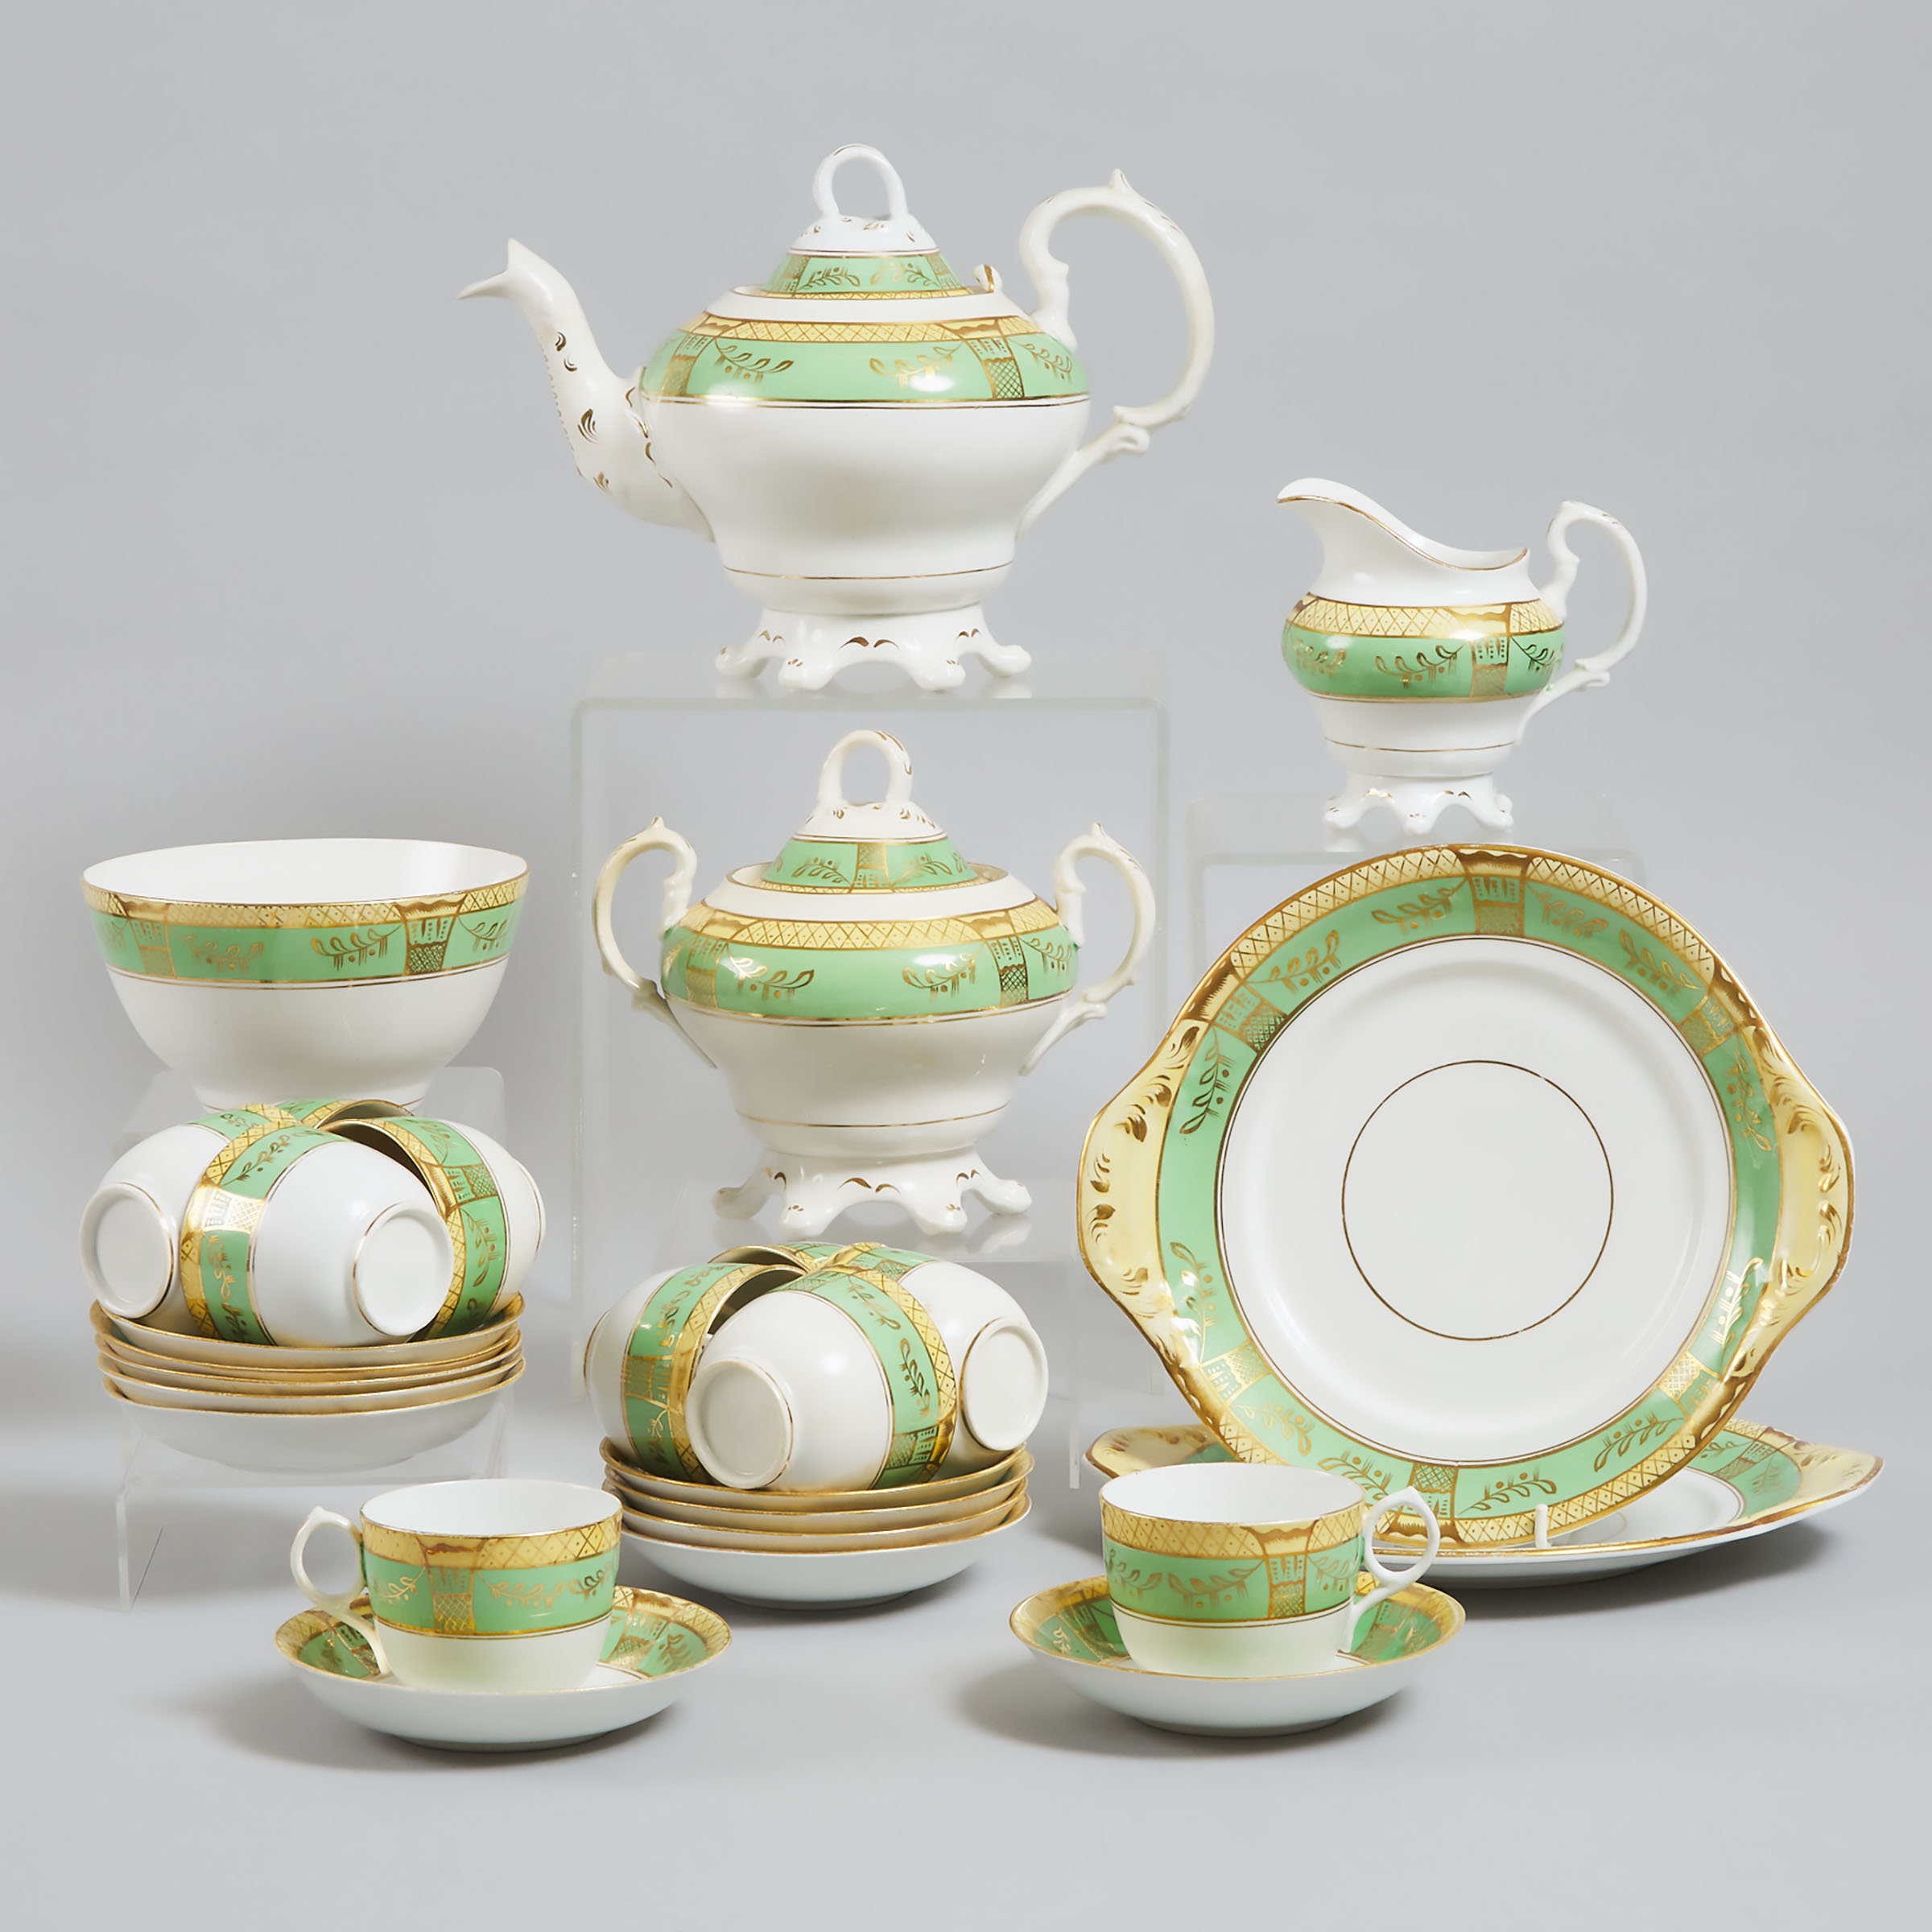 English Porcelain Apple Green, Yellow and Gilt Banded Tea Service, mid-19th century